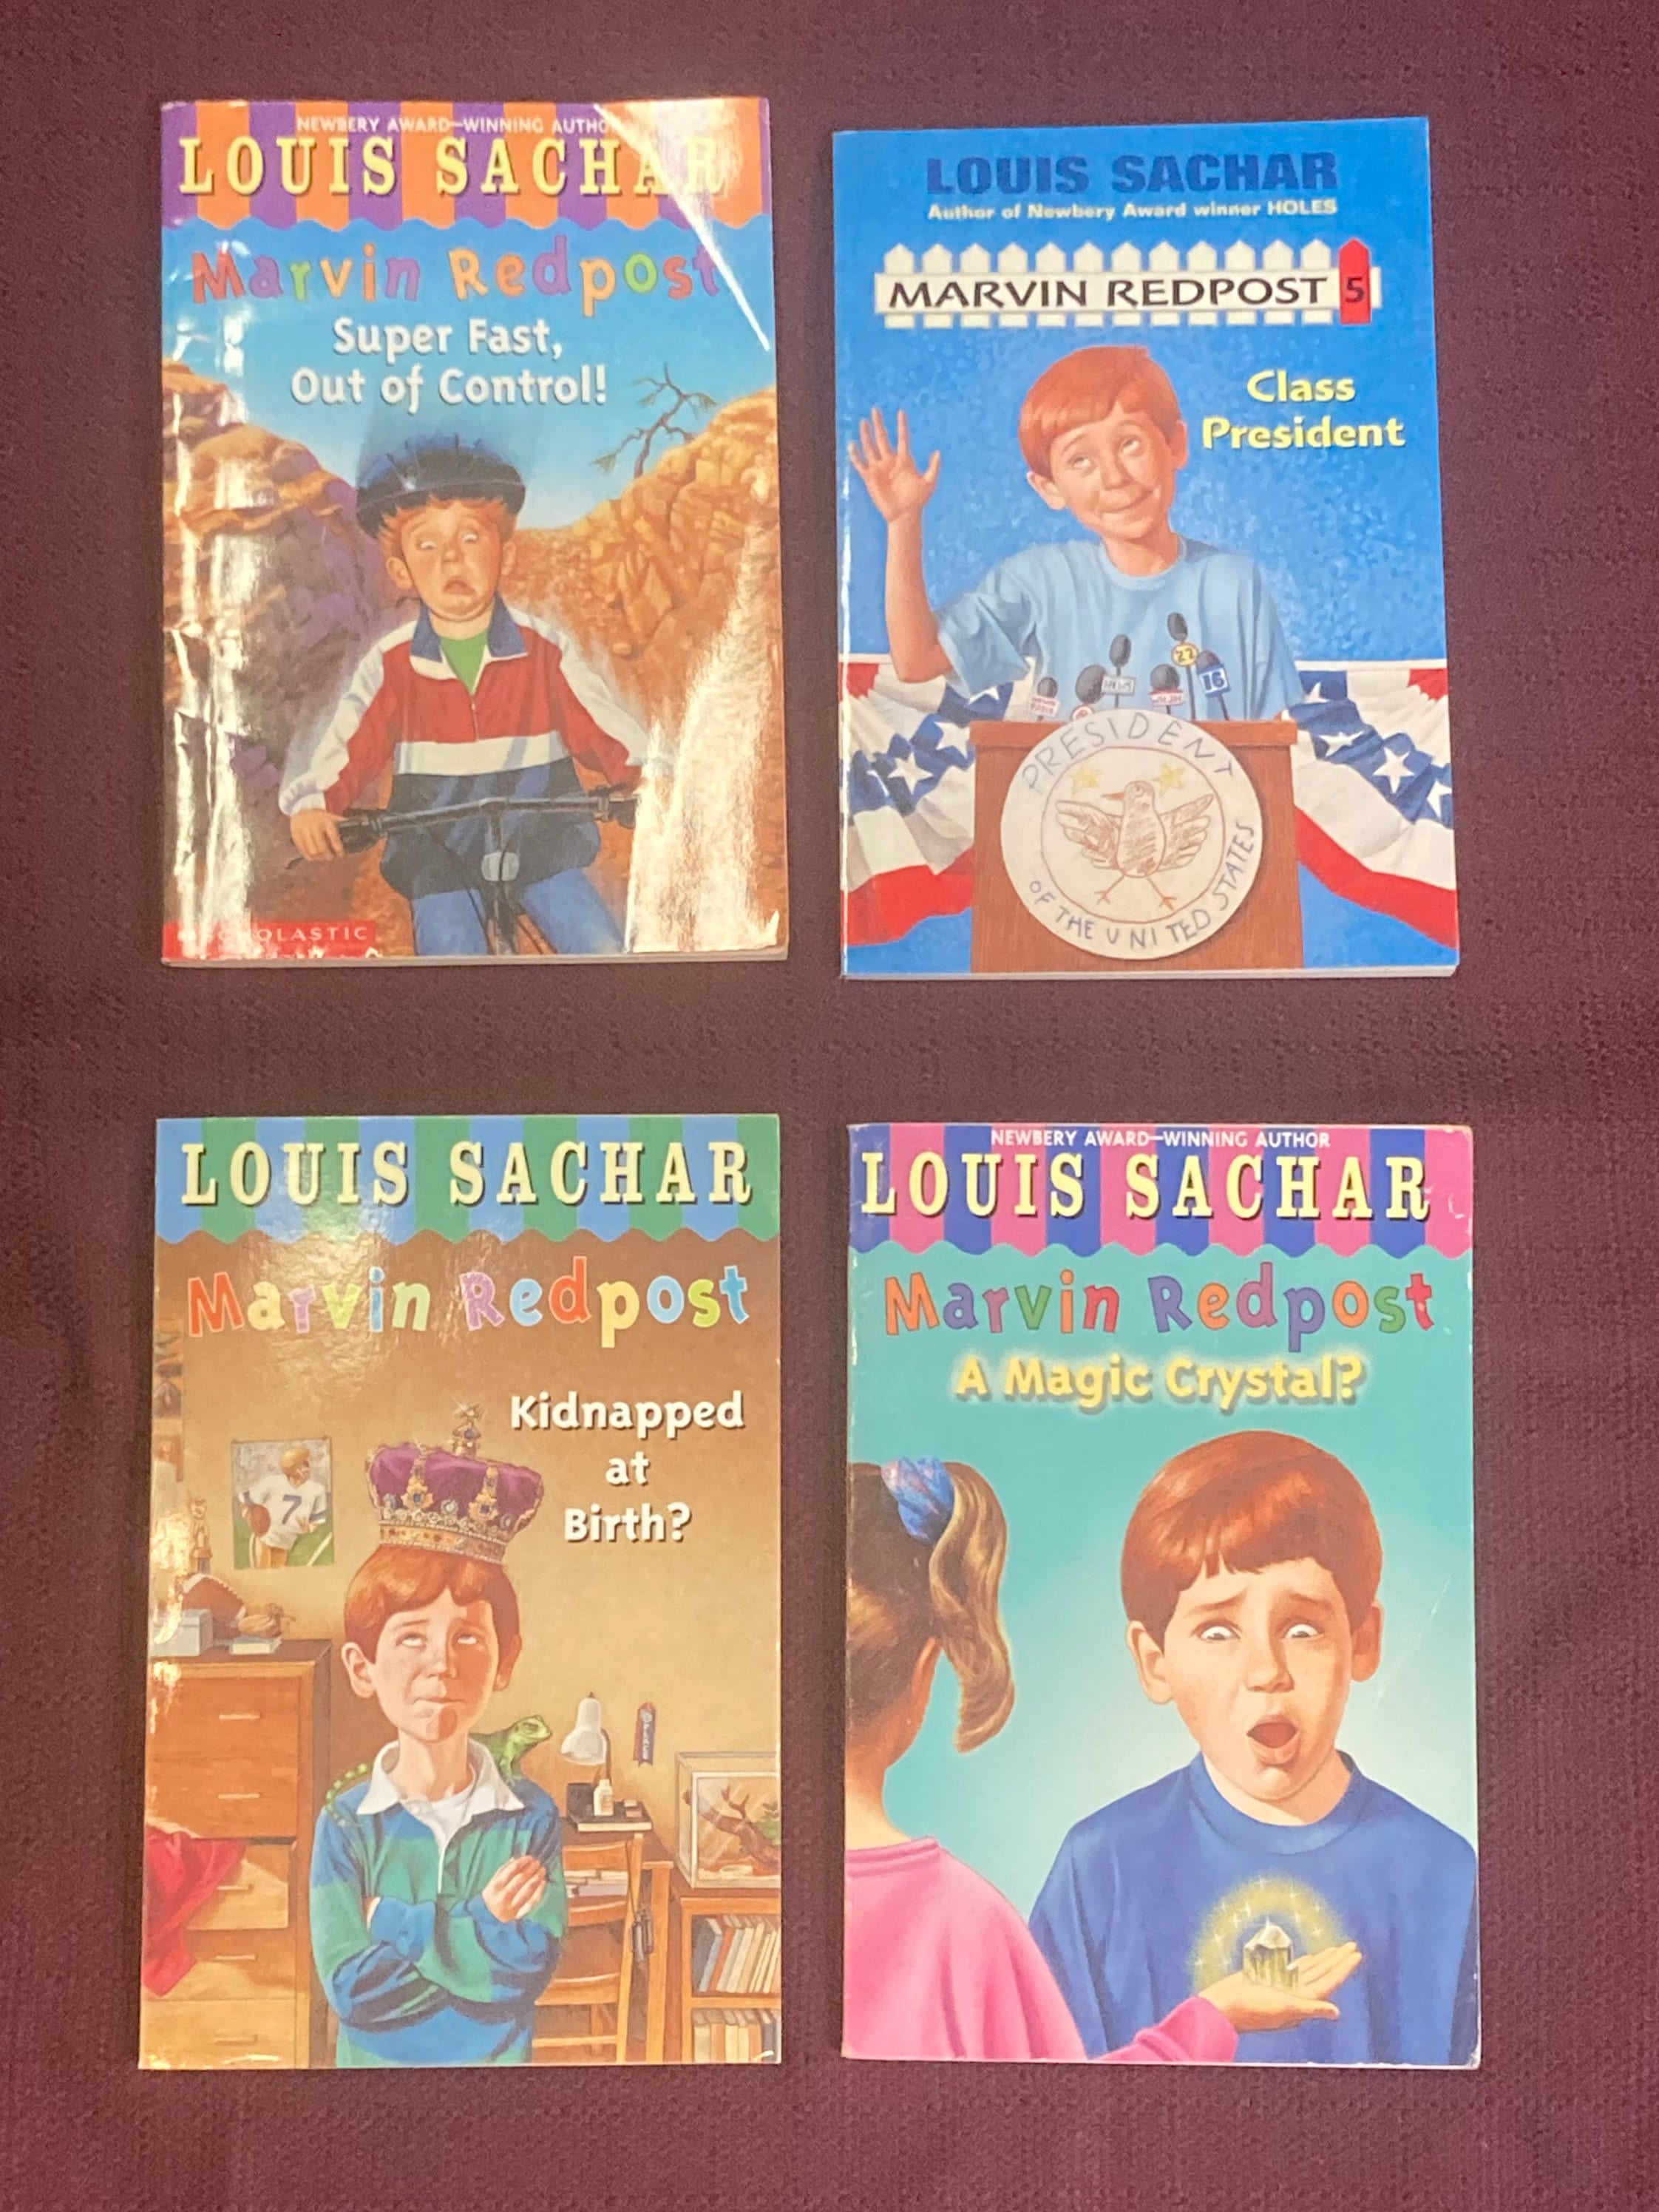 Marvin Redpost Kidnapped at Birth, Louis Sachar. (Paperback